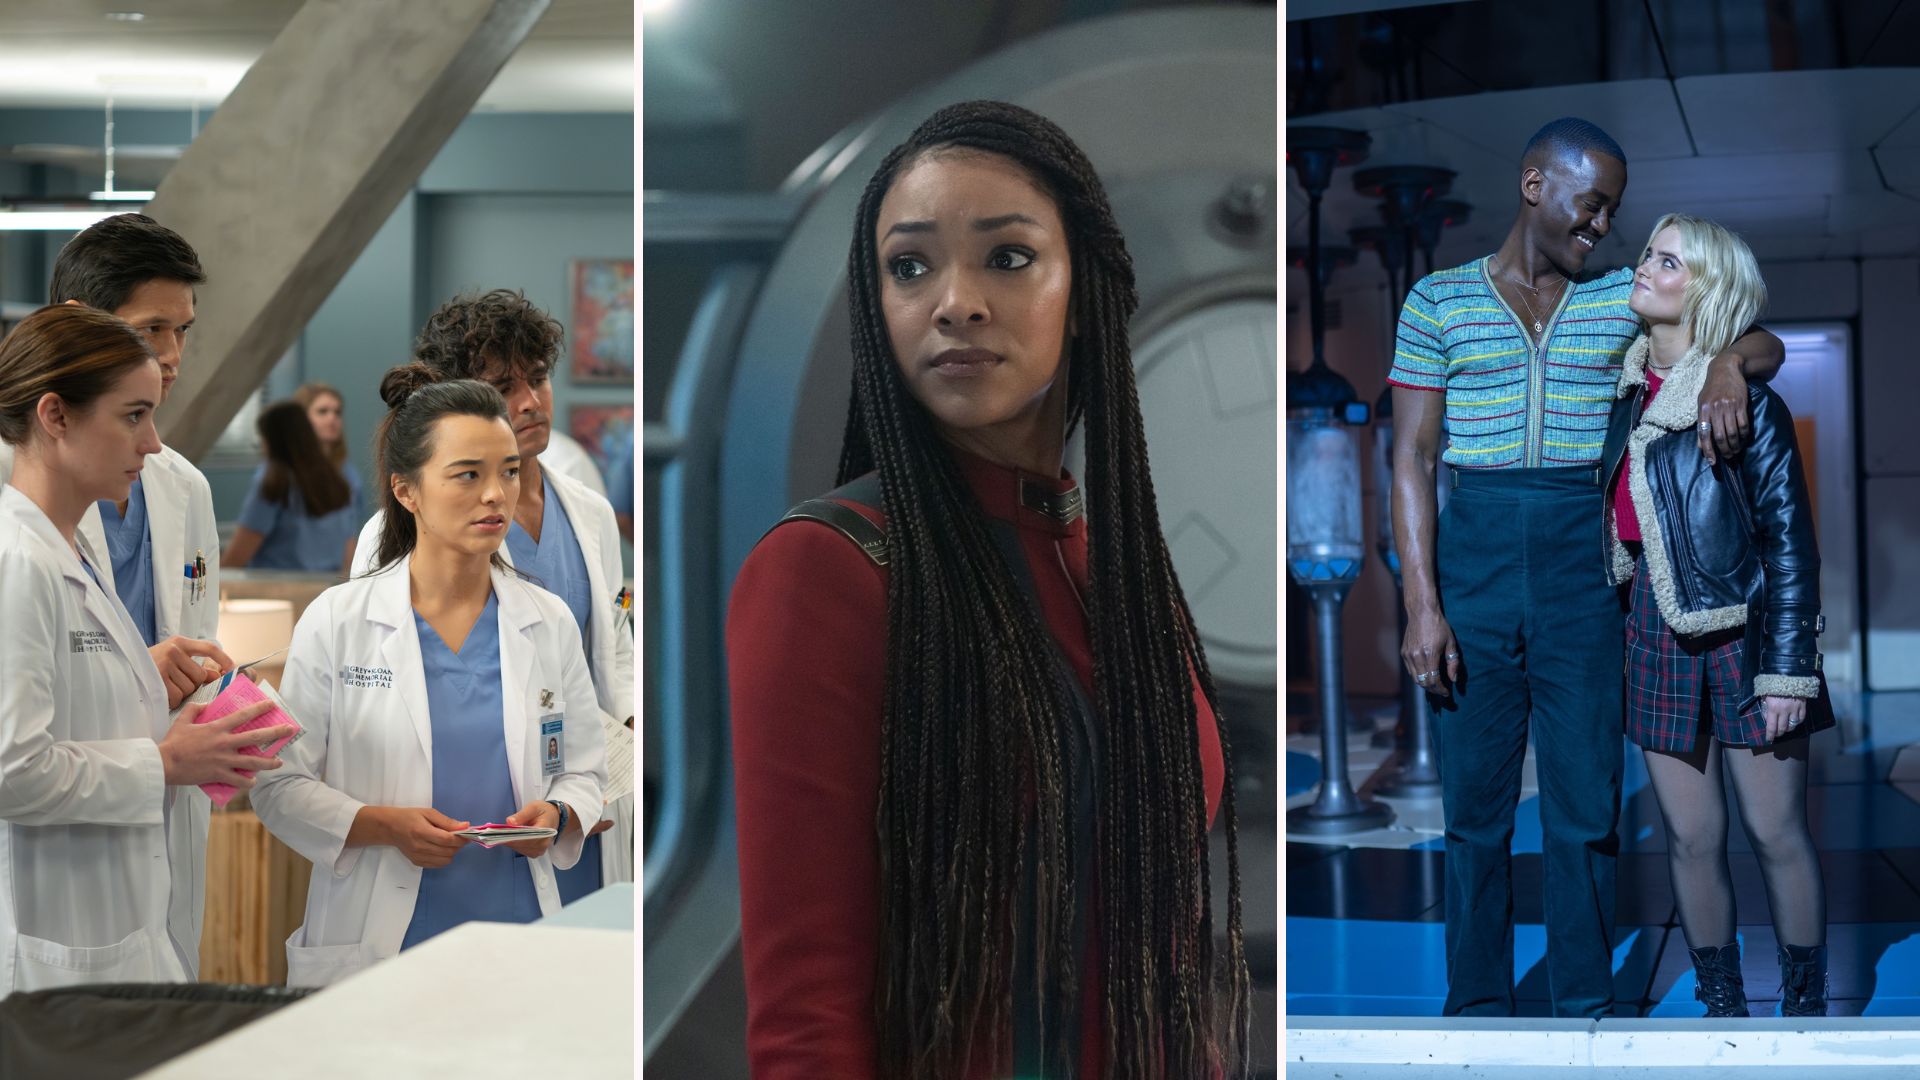 Grey's Anatomy, Star Trek: Discovery, and Doctor Who